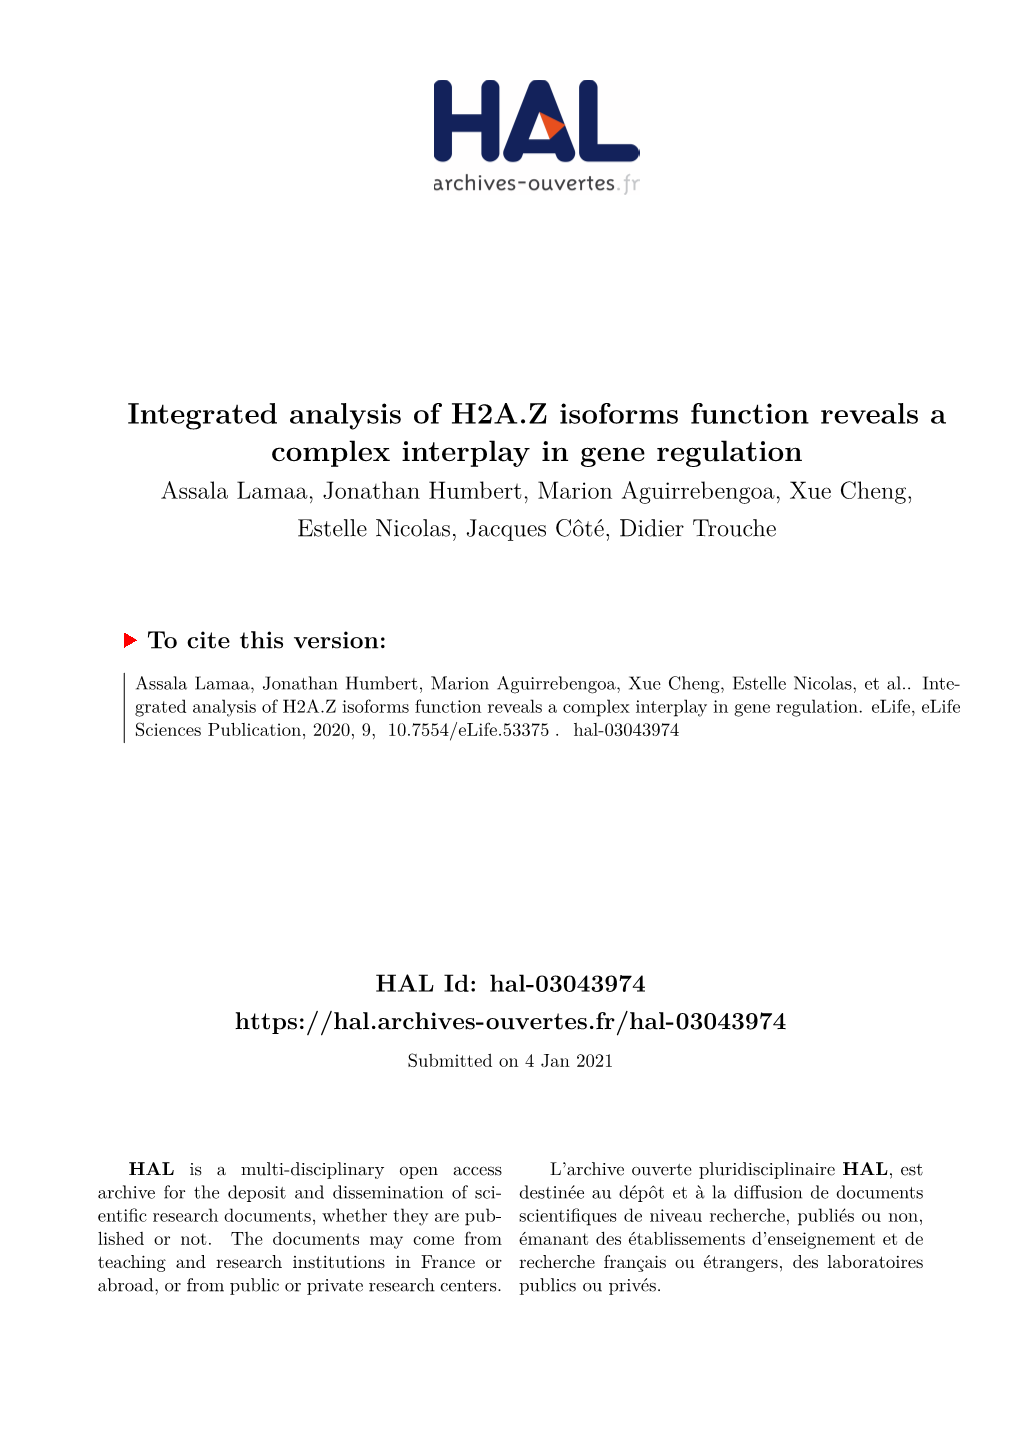 Integrated Analysis of H2A.Z Isoforms Function Reveals a Complex Interplay in Gene Regulation